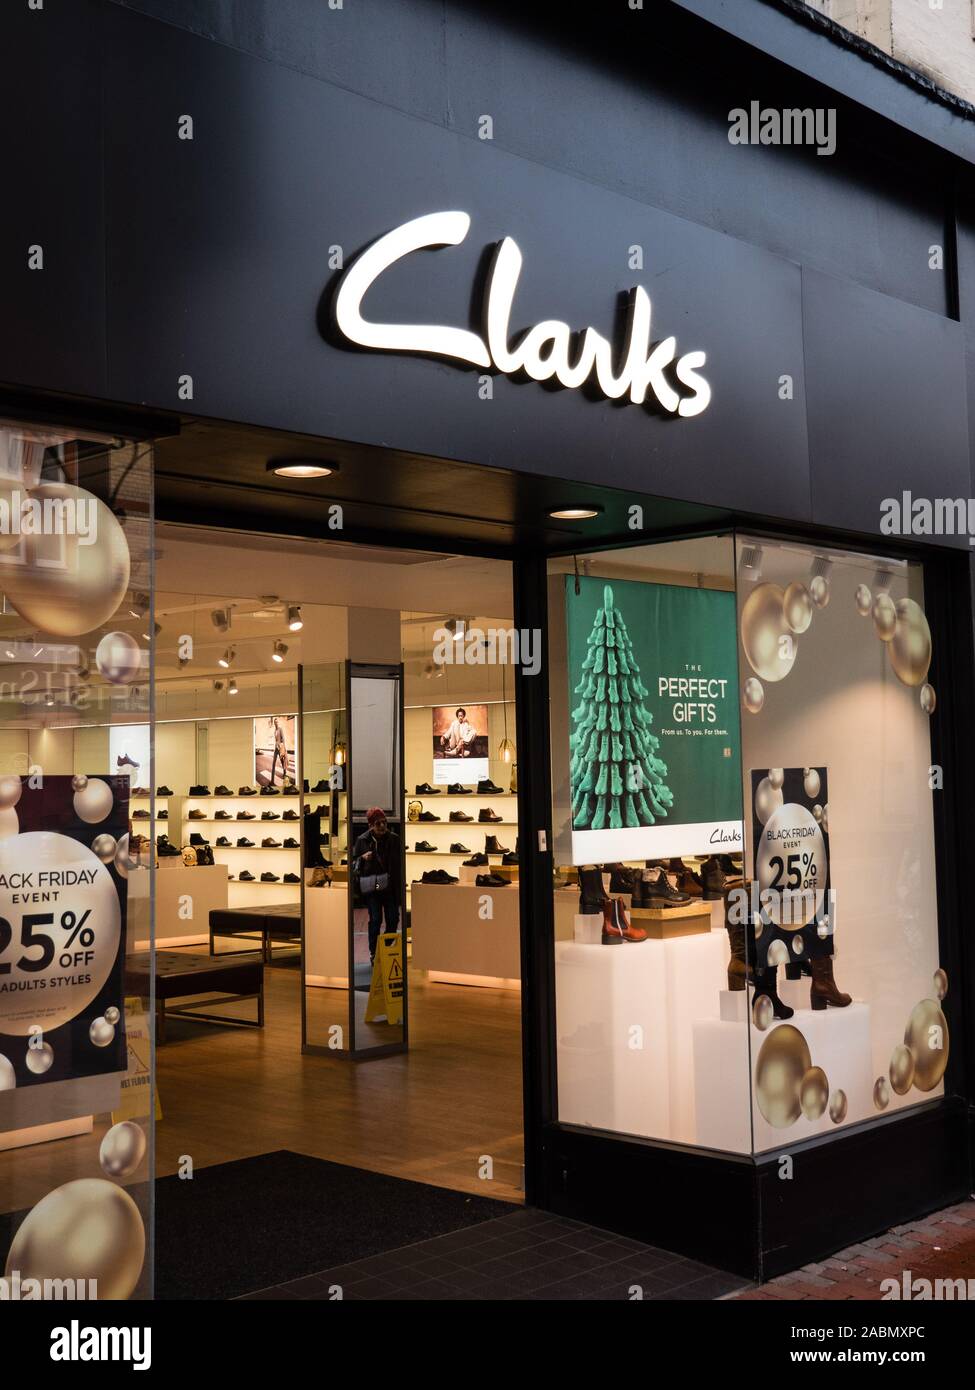 england clarks store